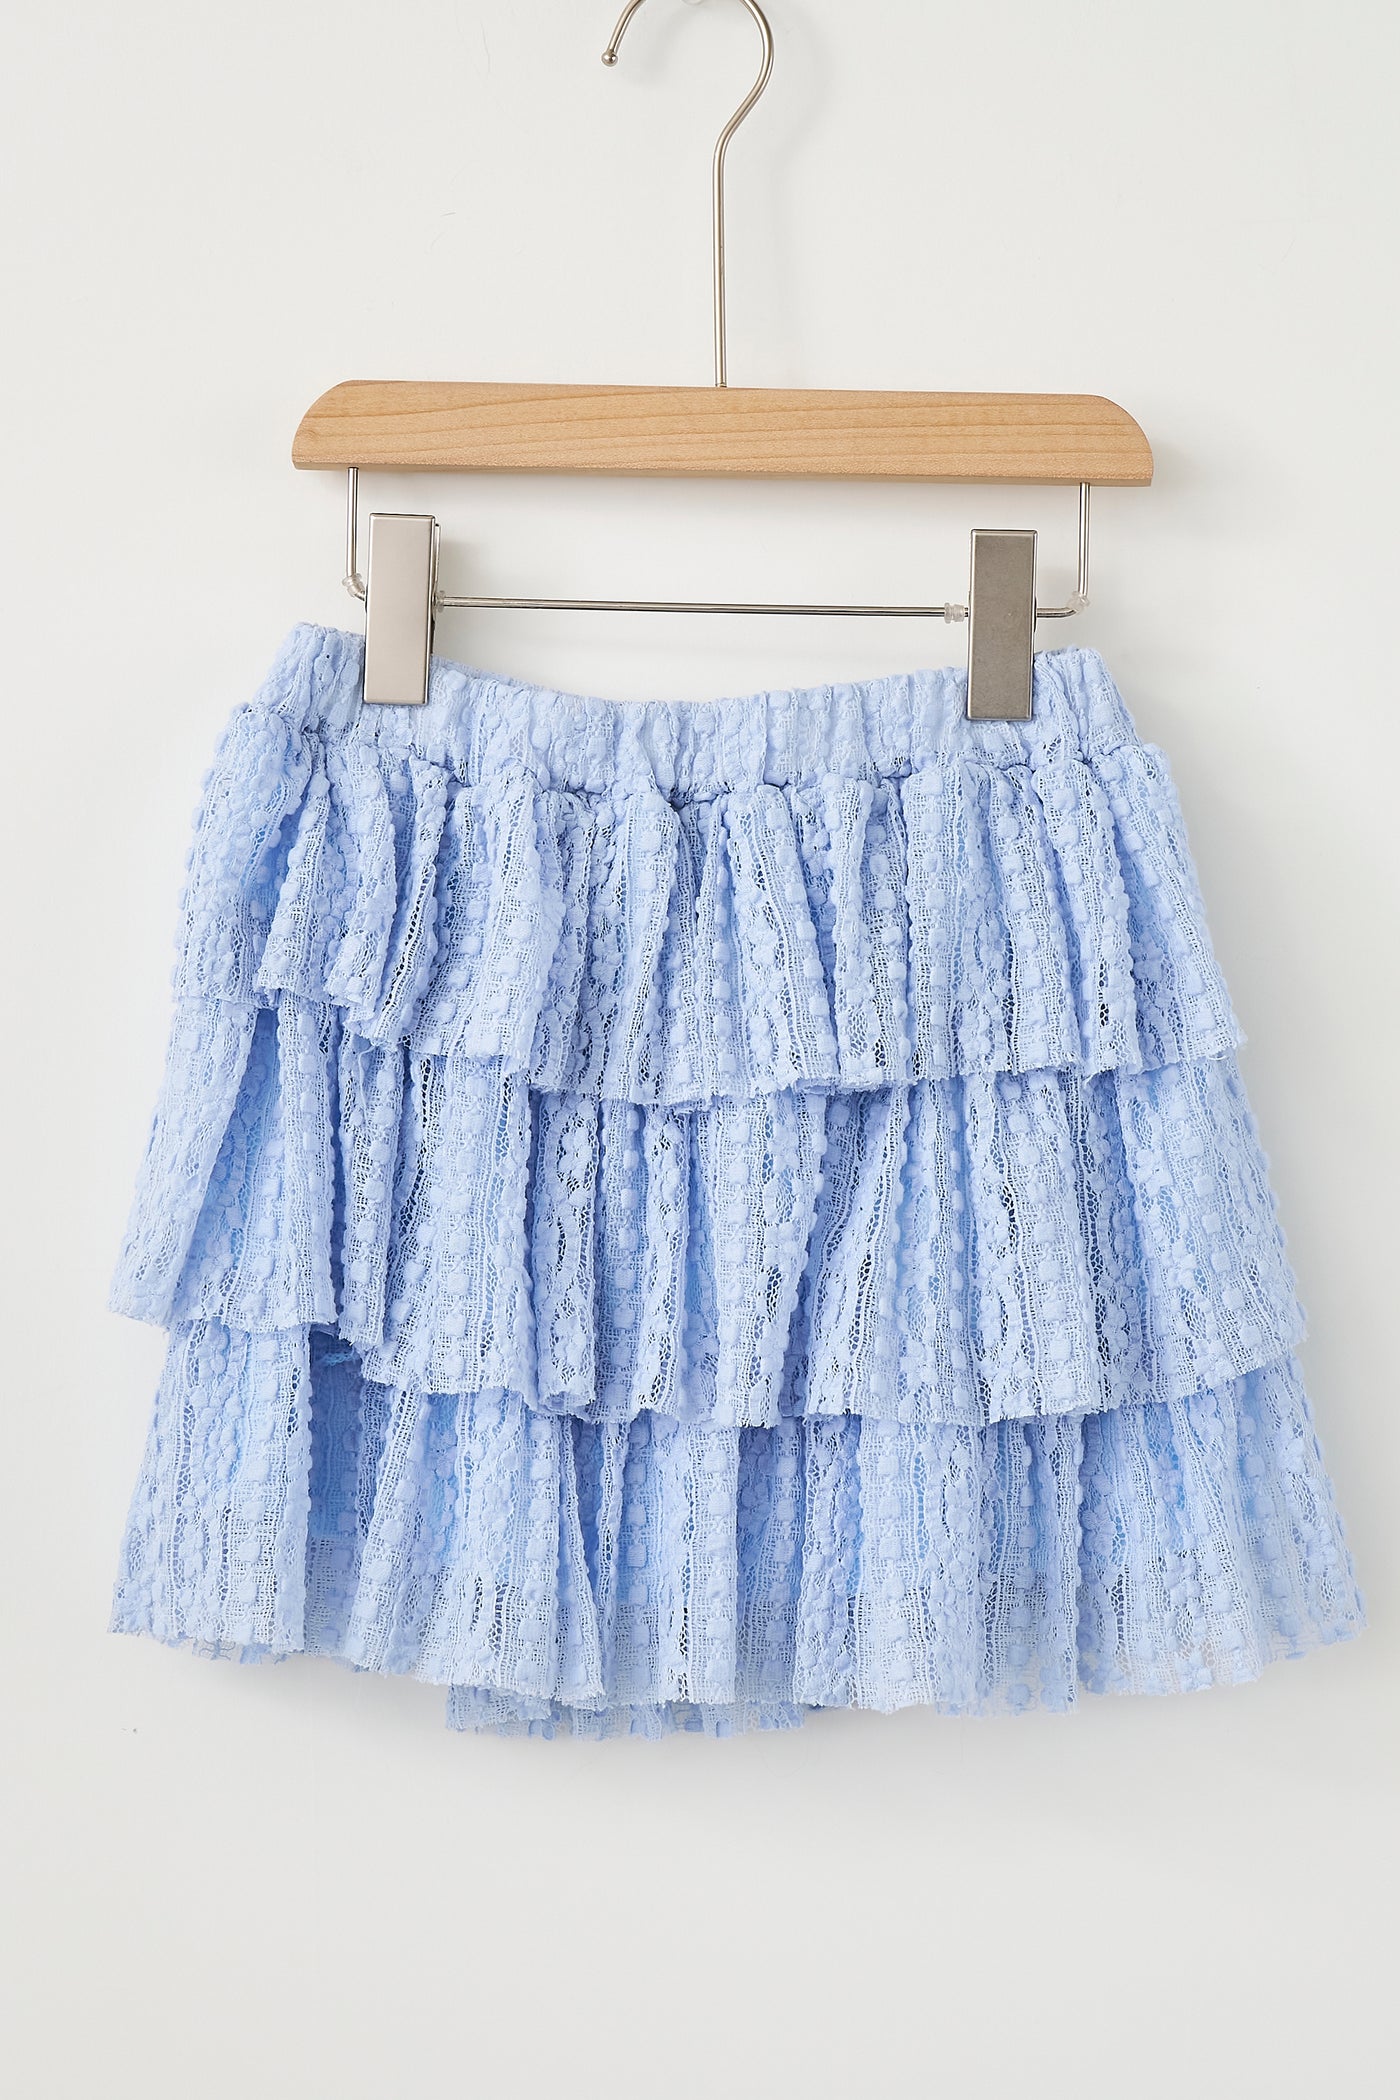 storets.com Ailey Tiered Lace Skorts